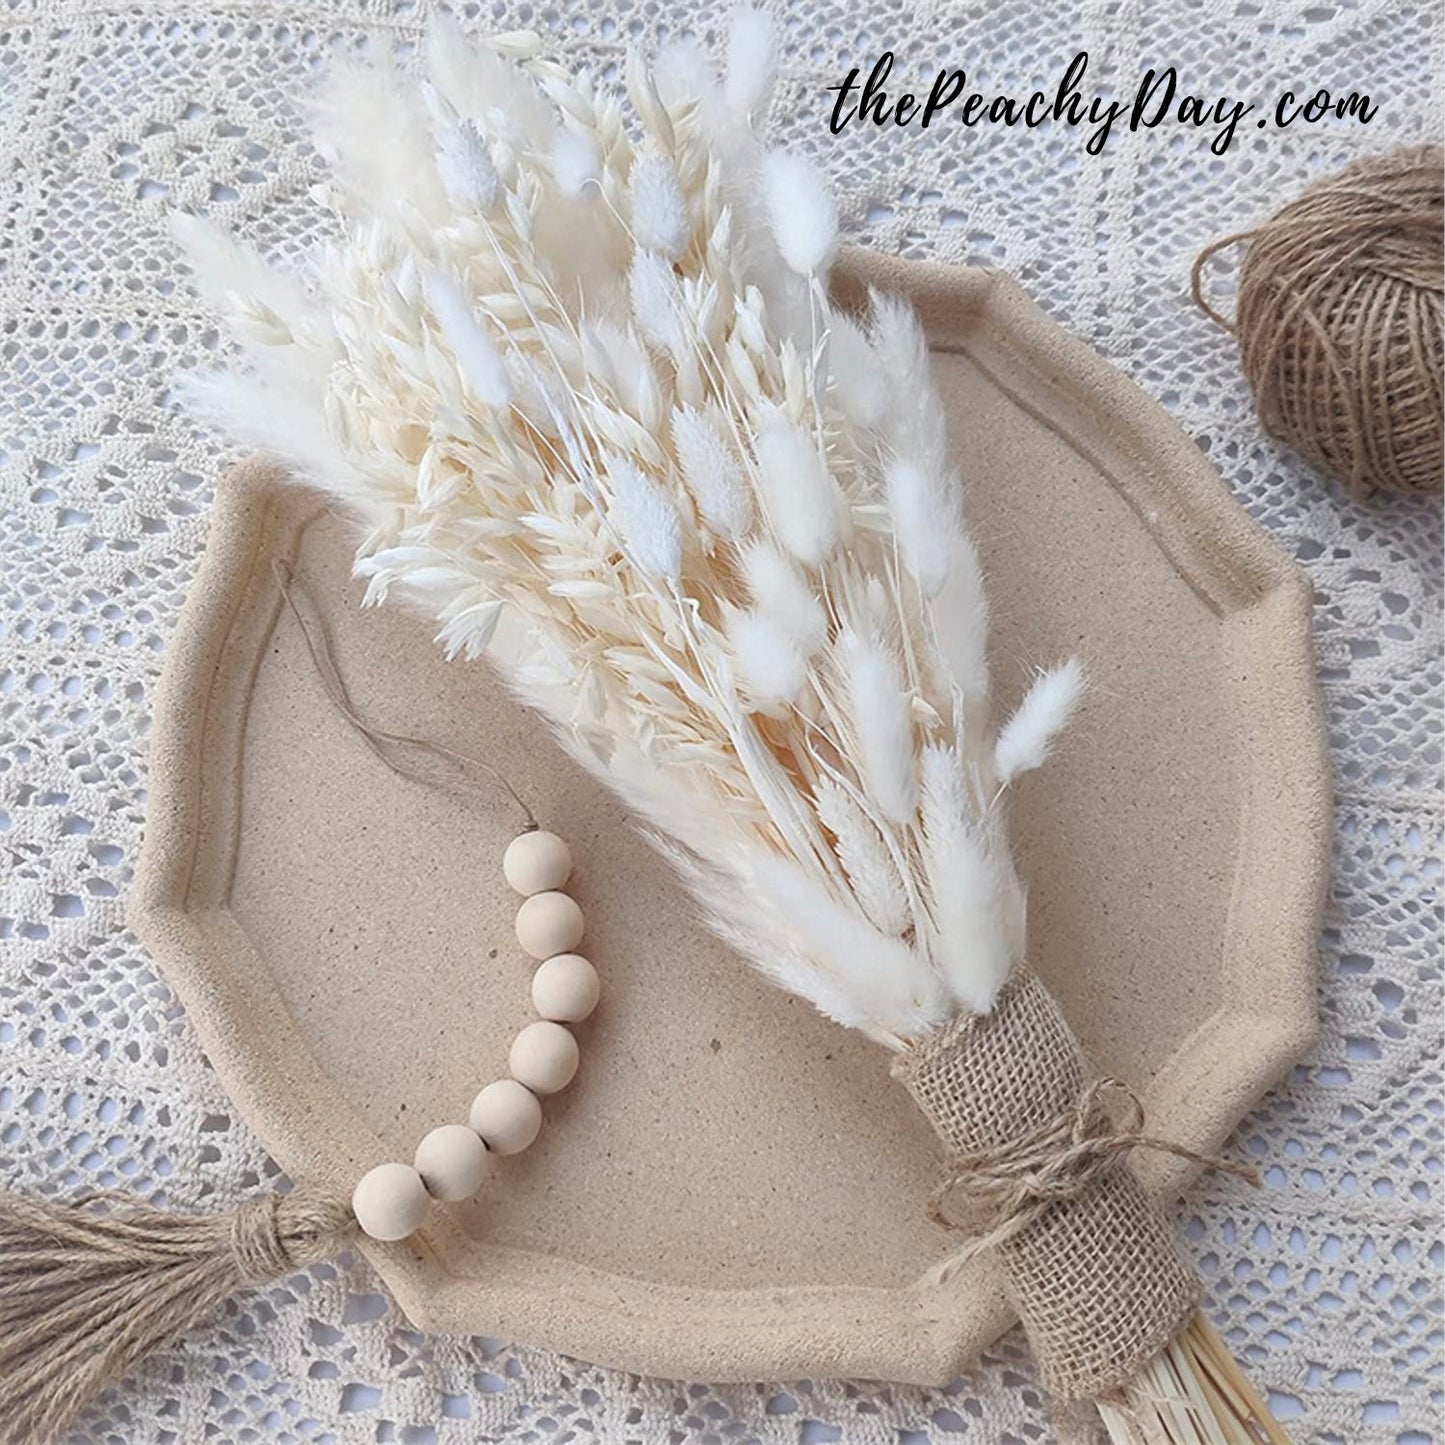 Dried Pampas Bunny Tail Bouquet 17"